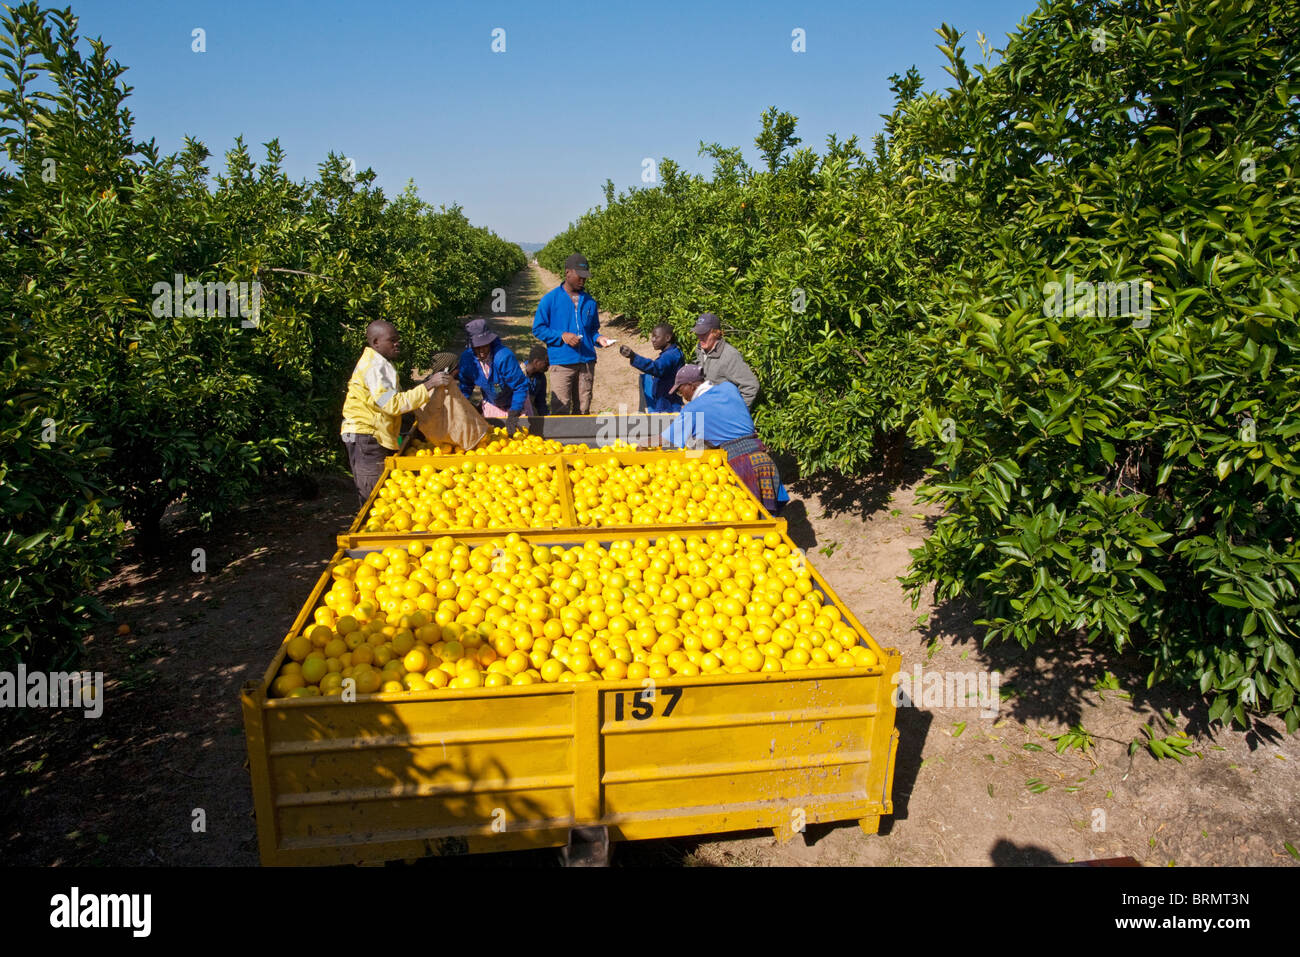 Workers sorting oranges on the back of a trailer Stock Photo